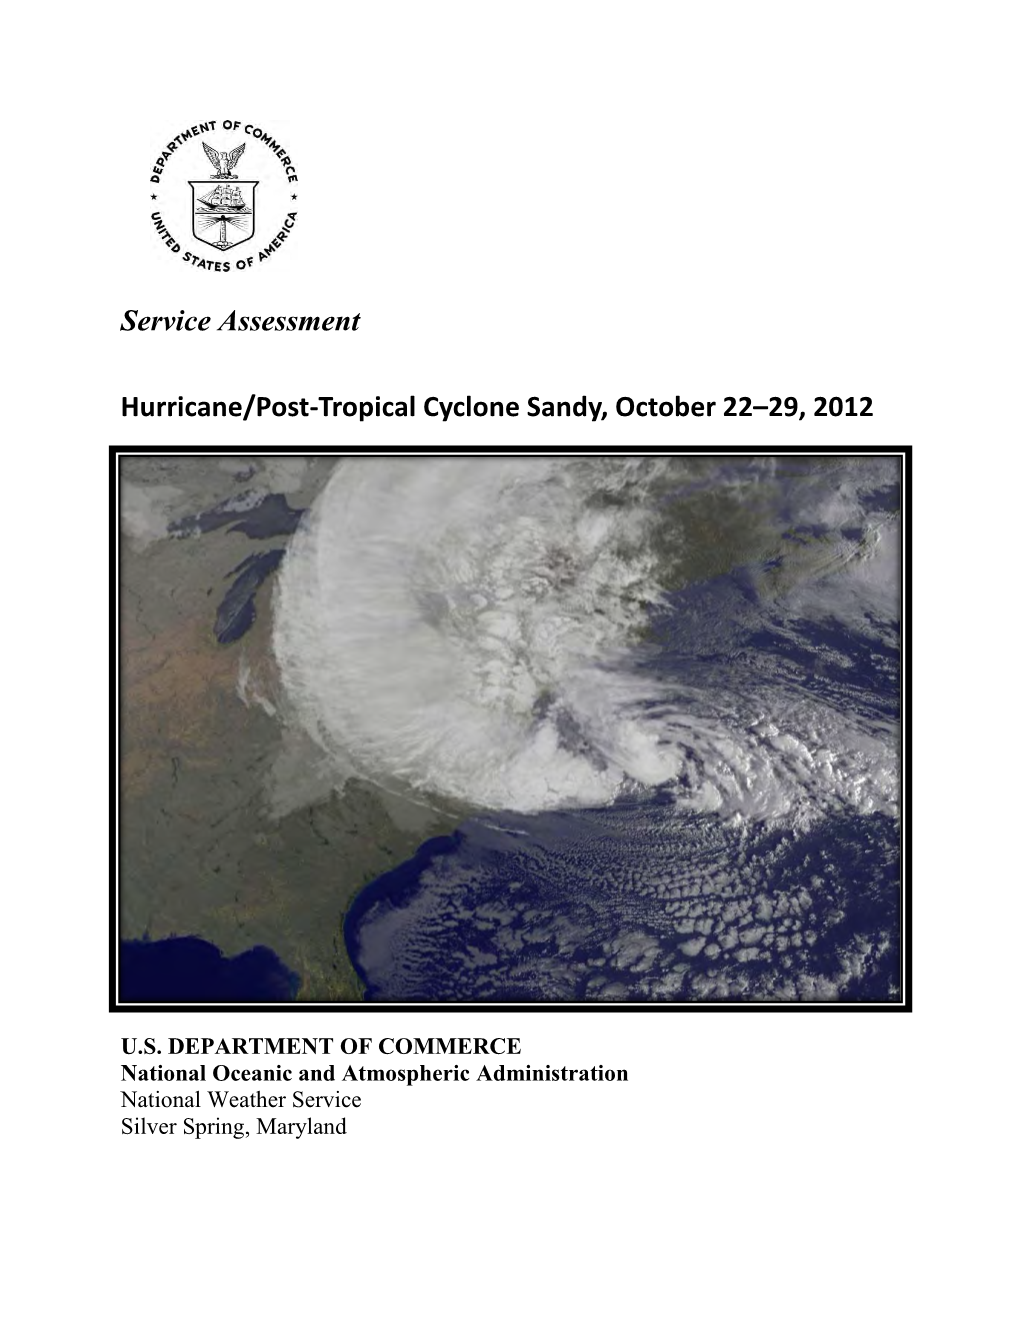 Service Assessment Hurricane/Post-Tropical Cyclone